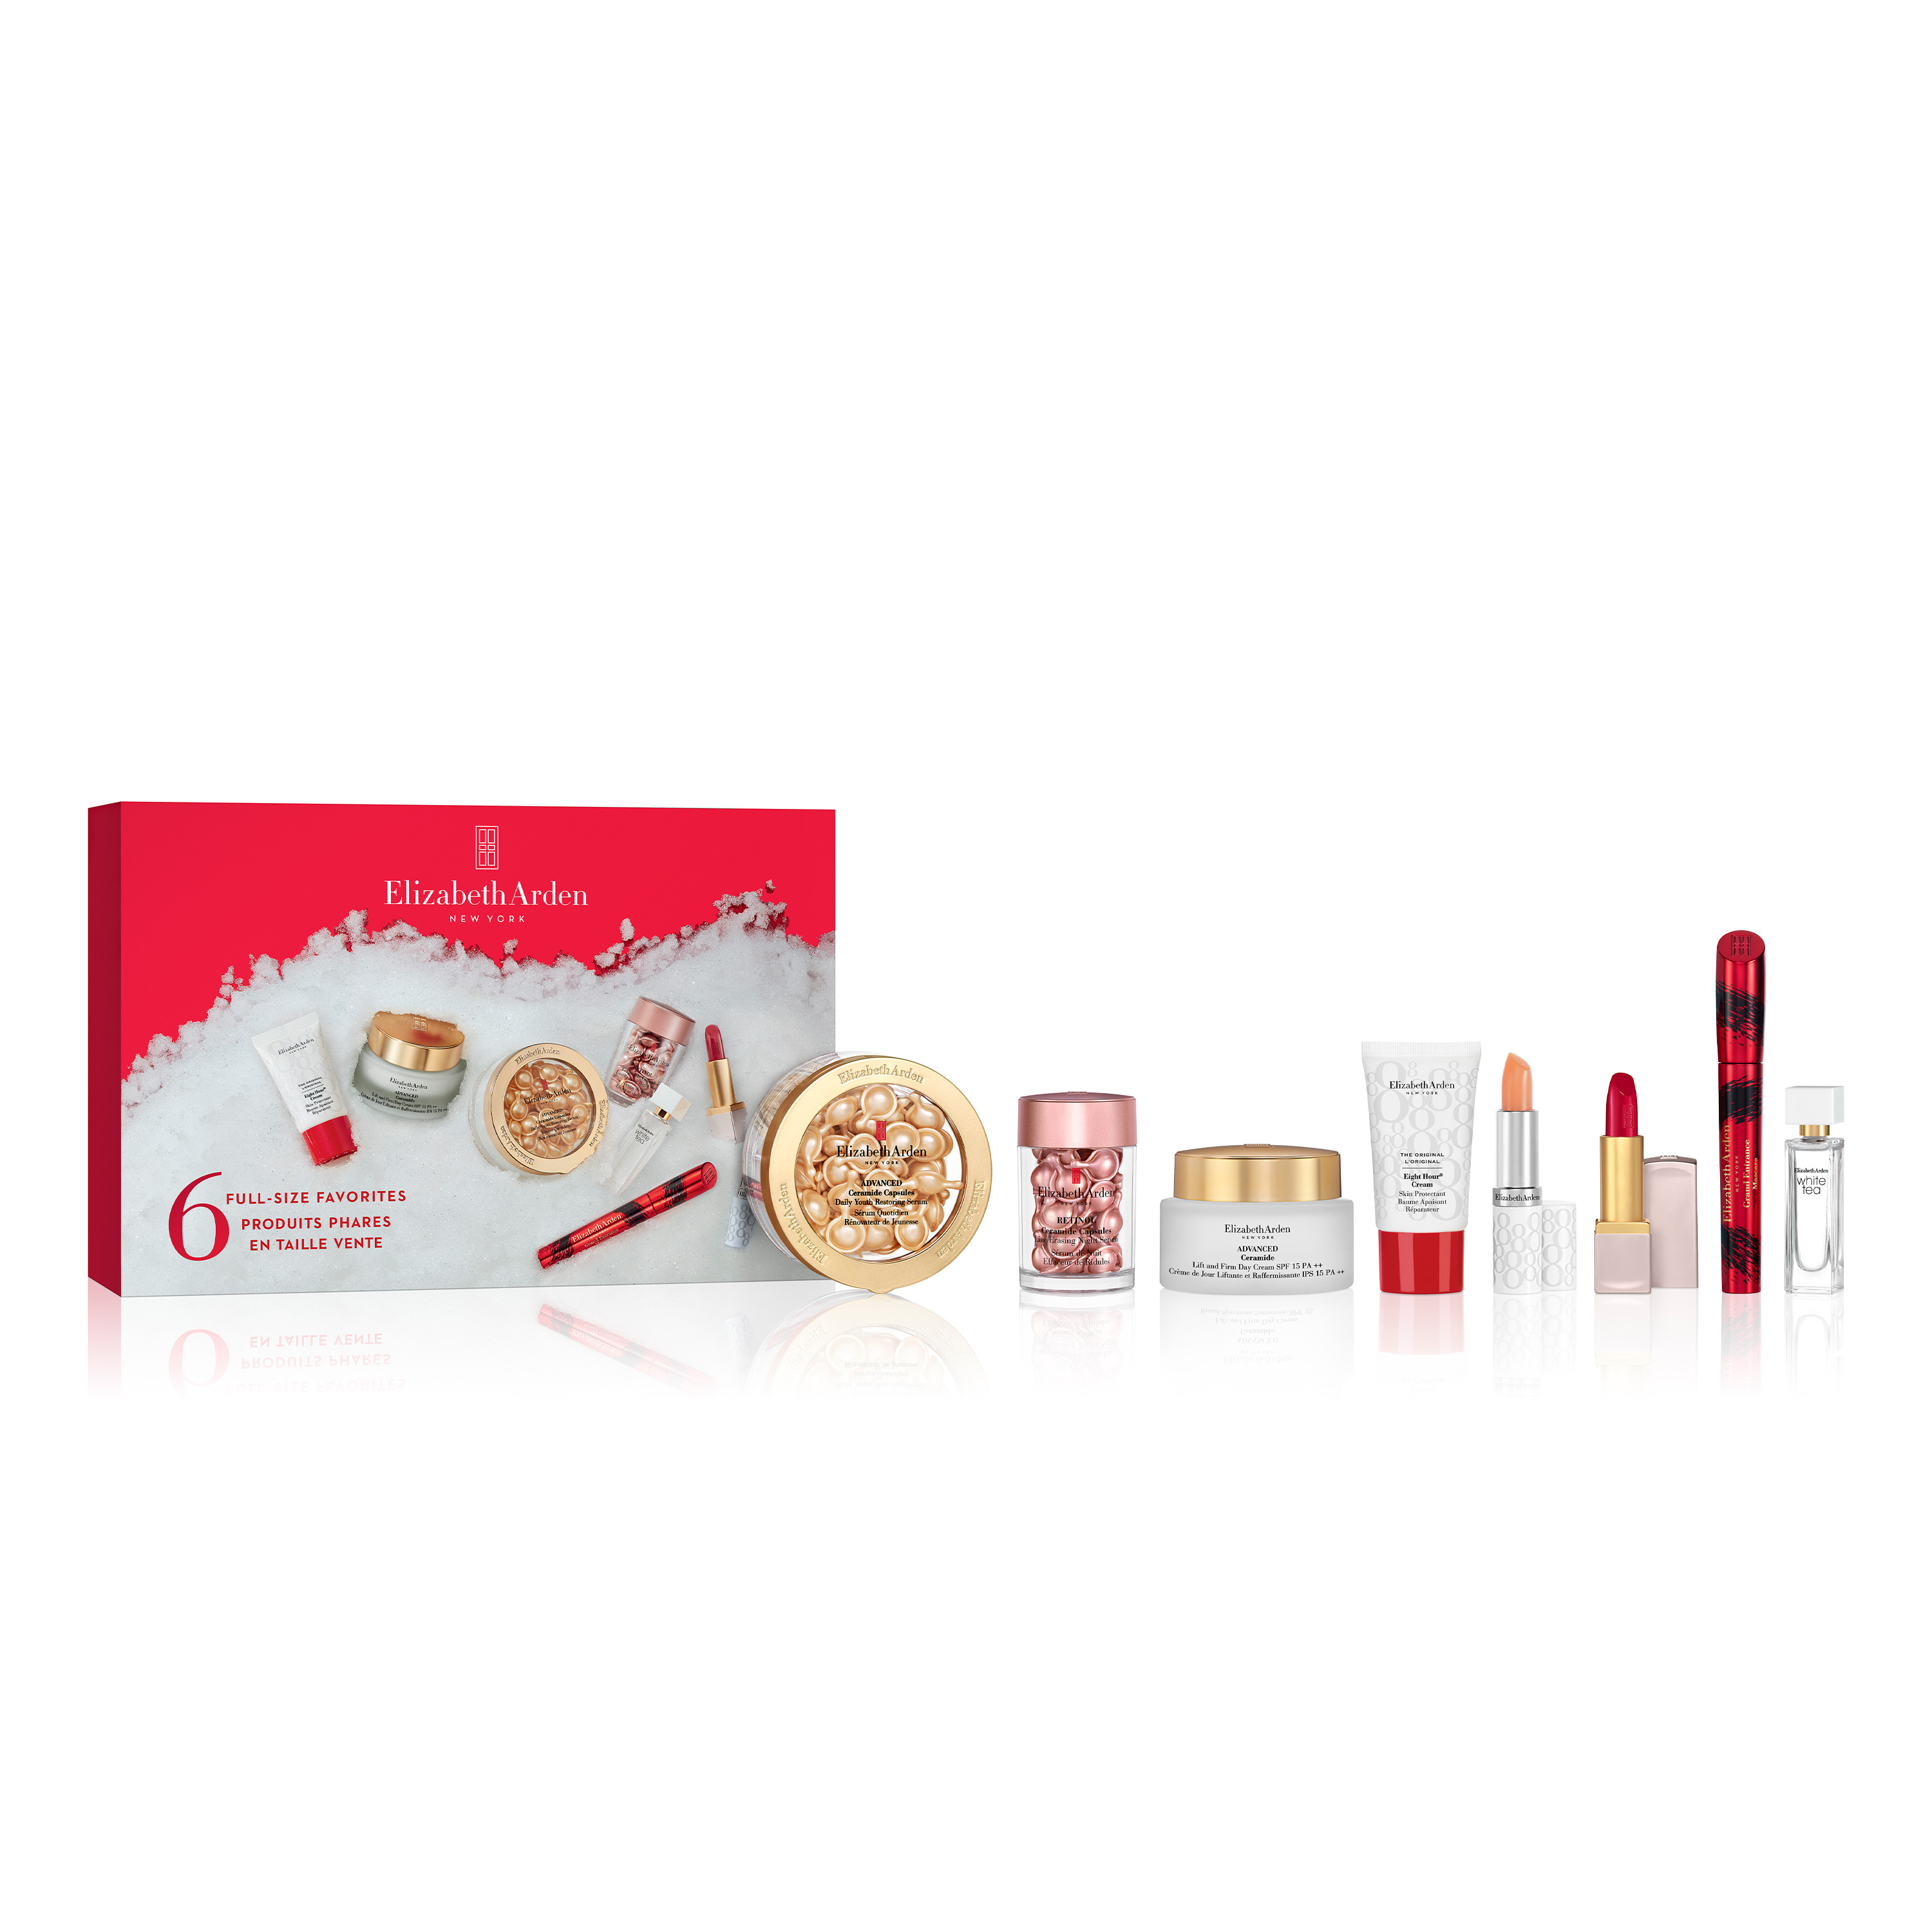 Spend €55 on Elizabeth Arden products and buy the blockbuster for €93